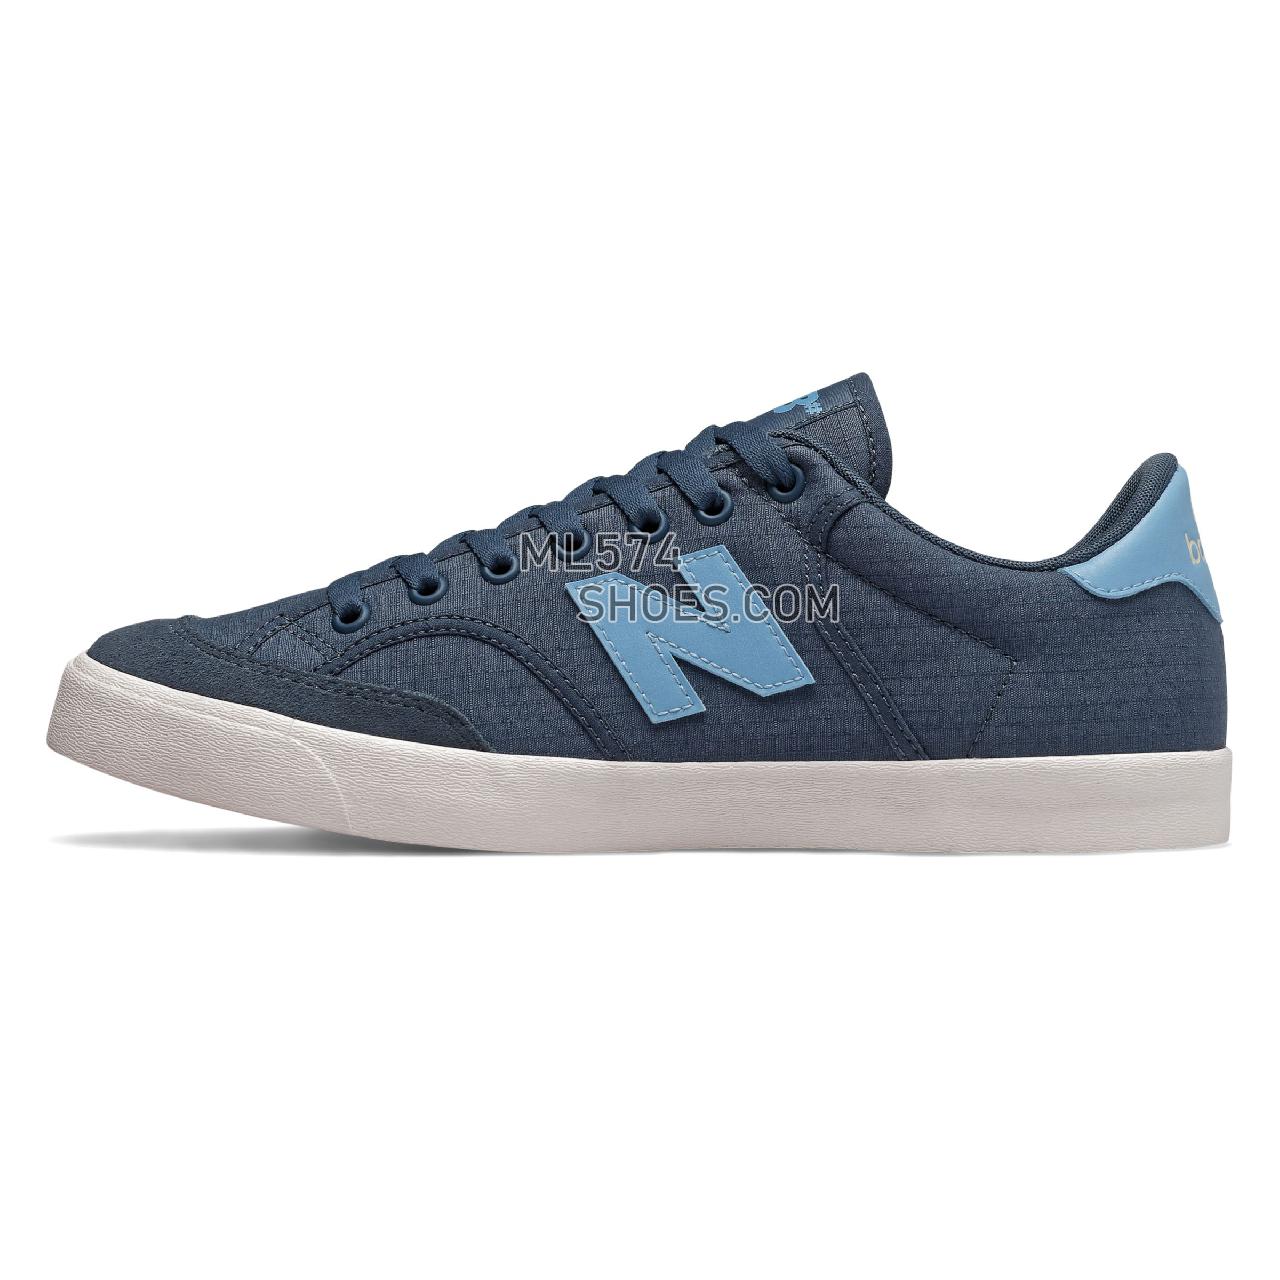 New Balance Numeric 212 - Men's NB Numeric Skate - Navy with Baby Blue - NM212NBR